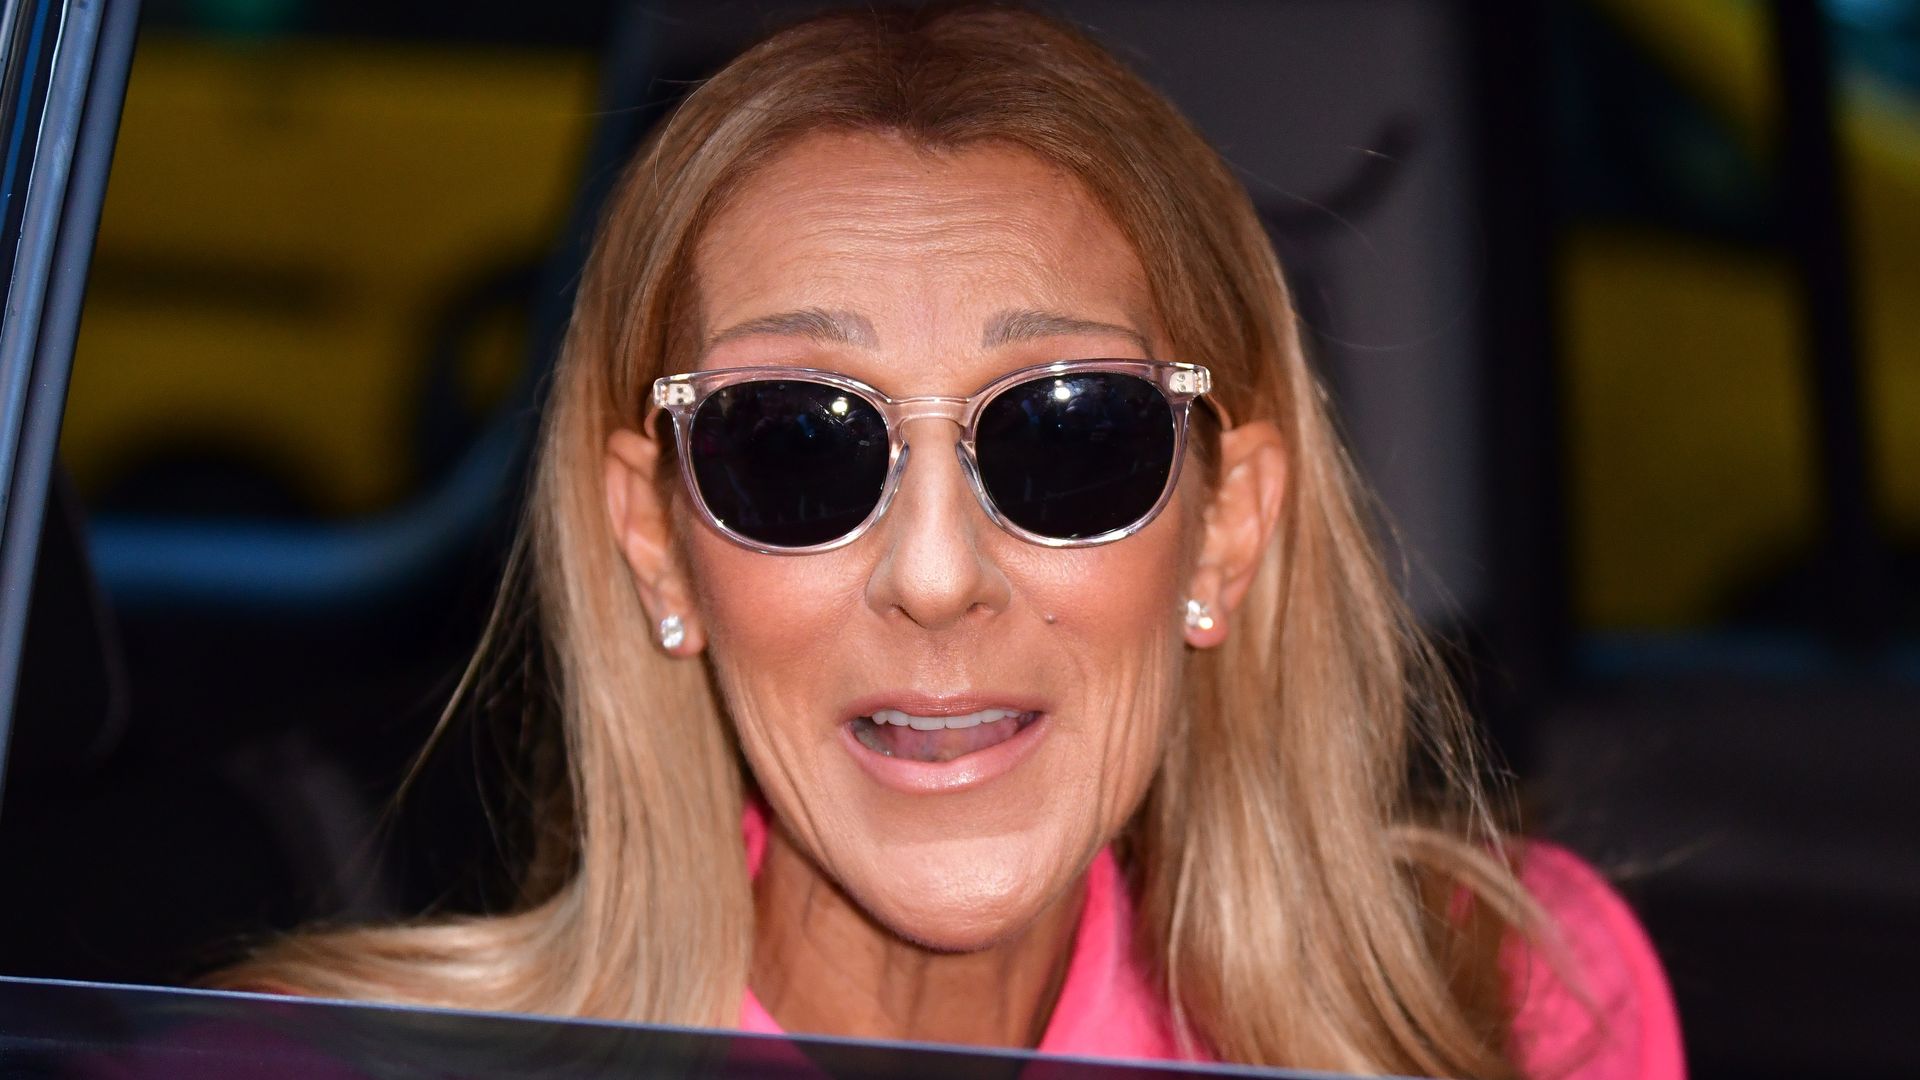 Celine Dion wearing sunglasses and a pink outfit in the back of a car in 2020